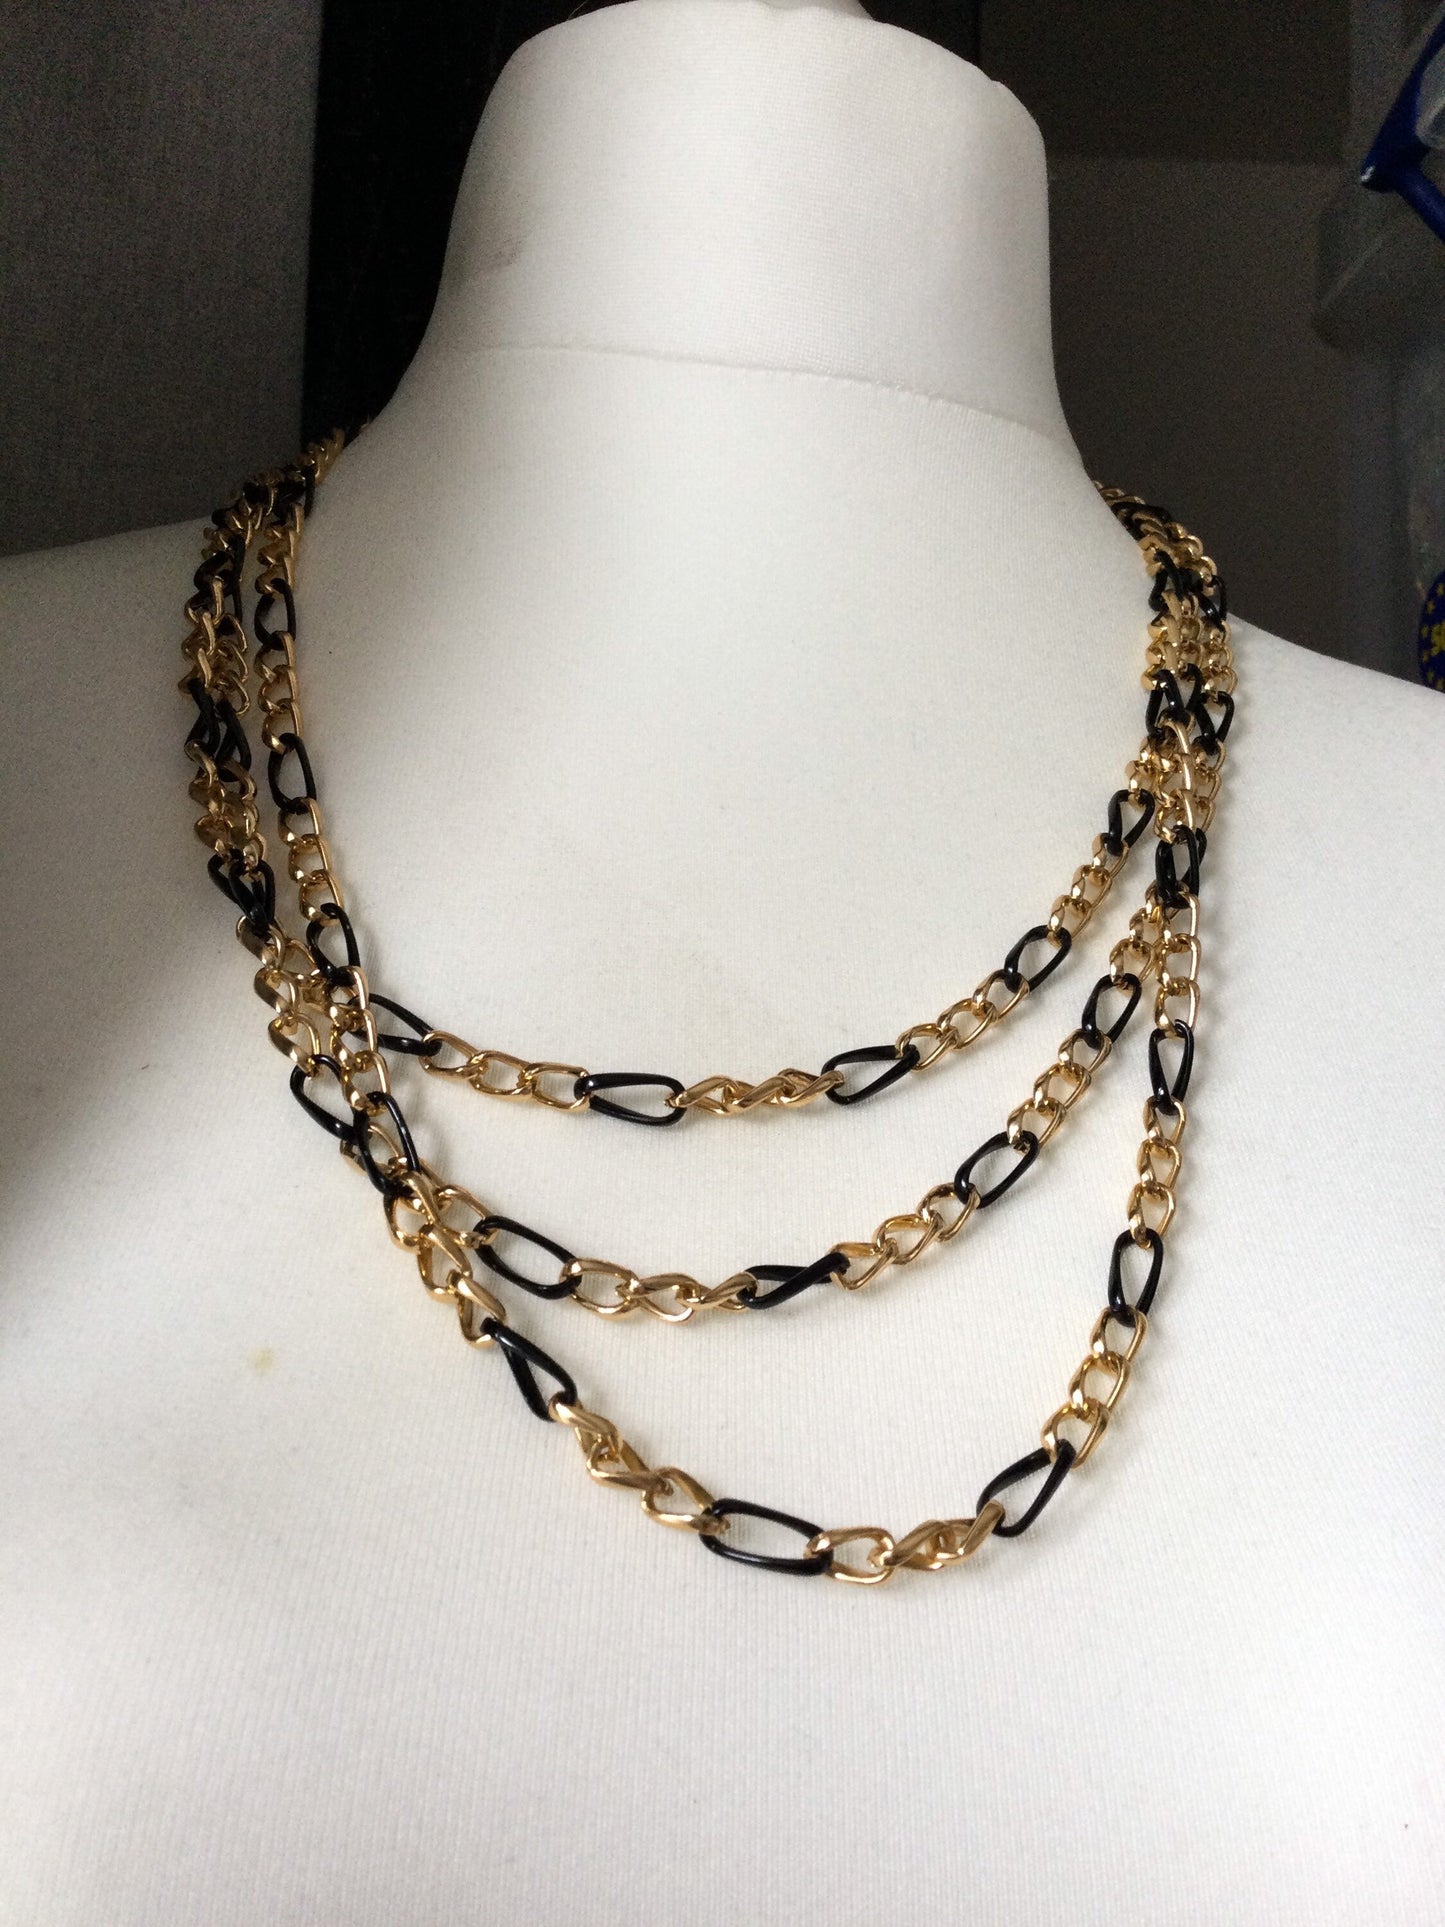 Vintage lightweight gold tone and black 3 strand necklace chain bib necklace